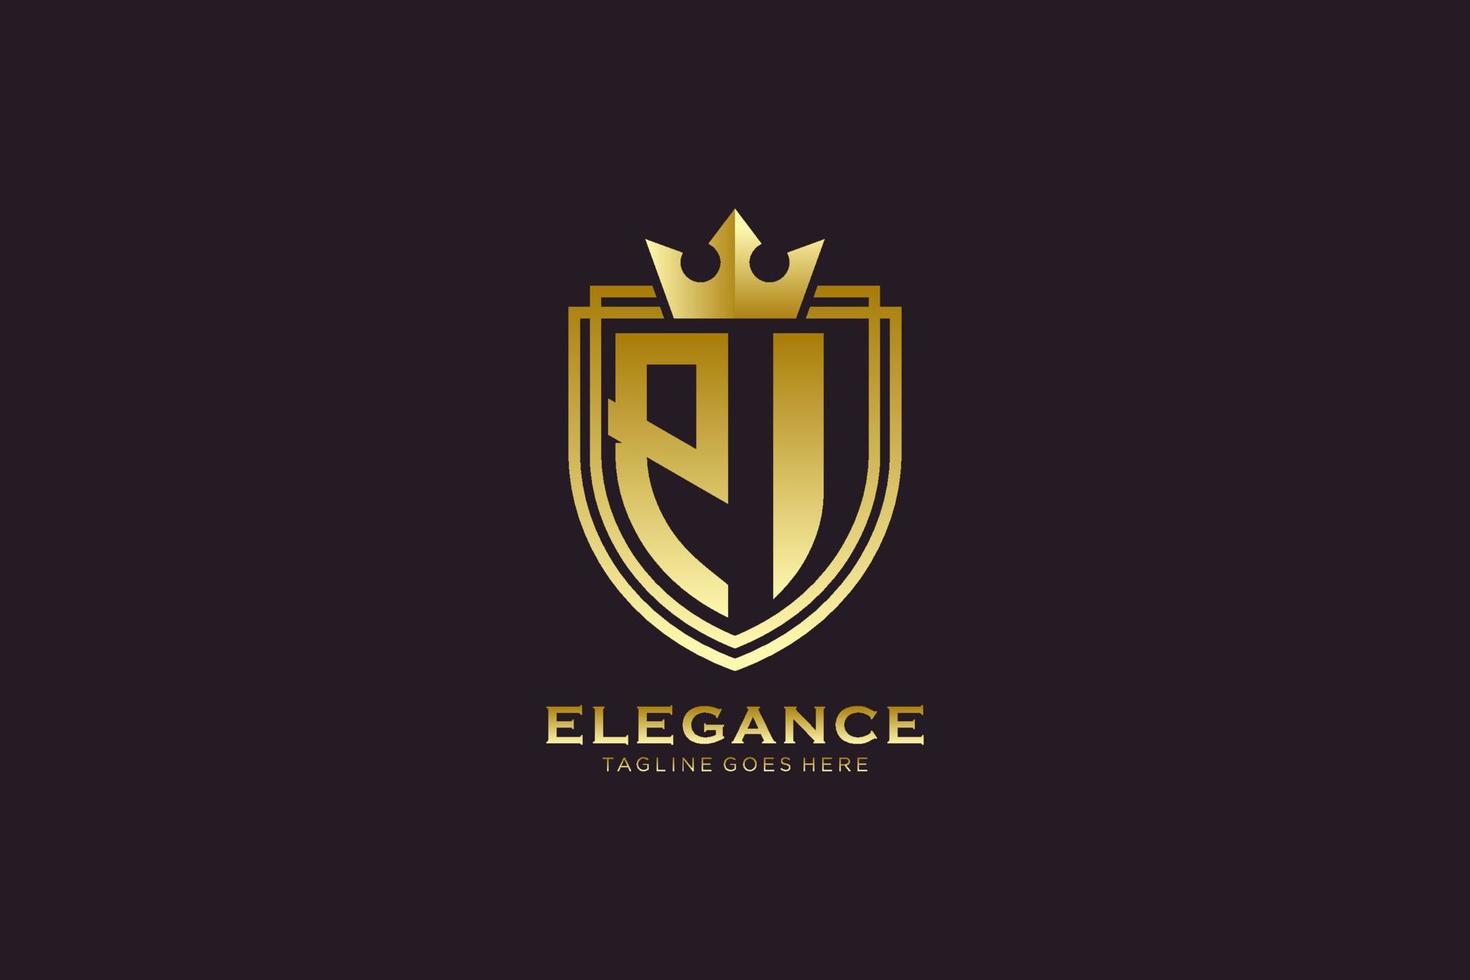 initial PI elegant luxury monogram logo or badge template with scrolls and royal crown - perfect for luxurious branding projects vector